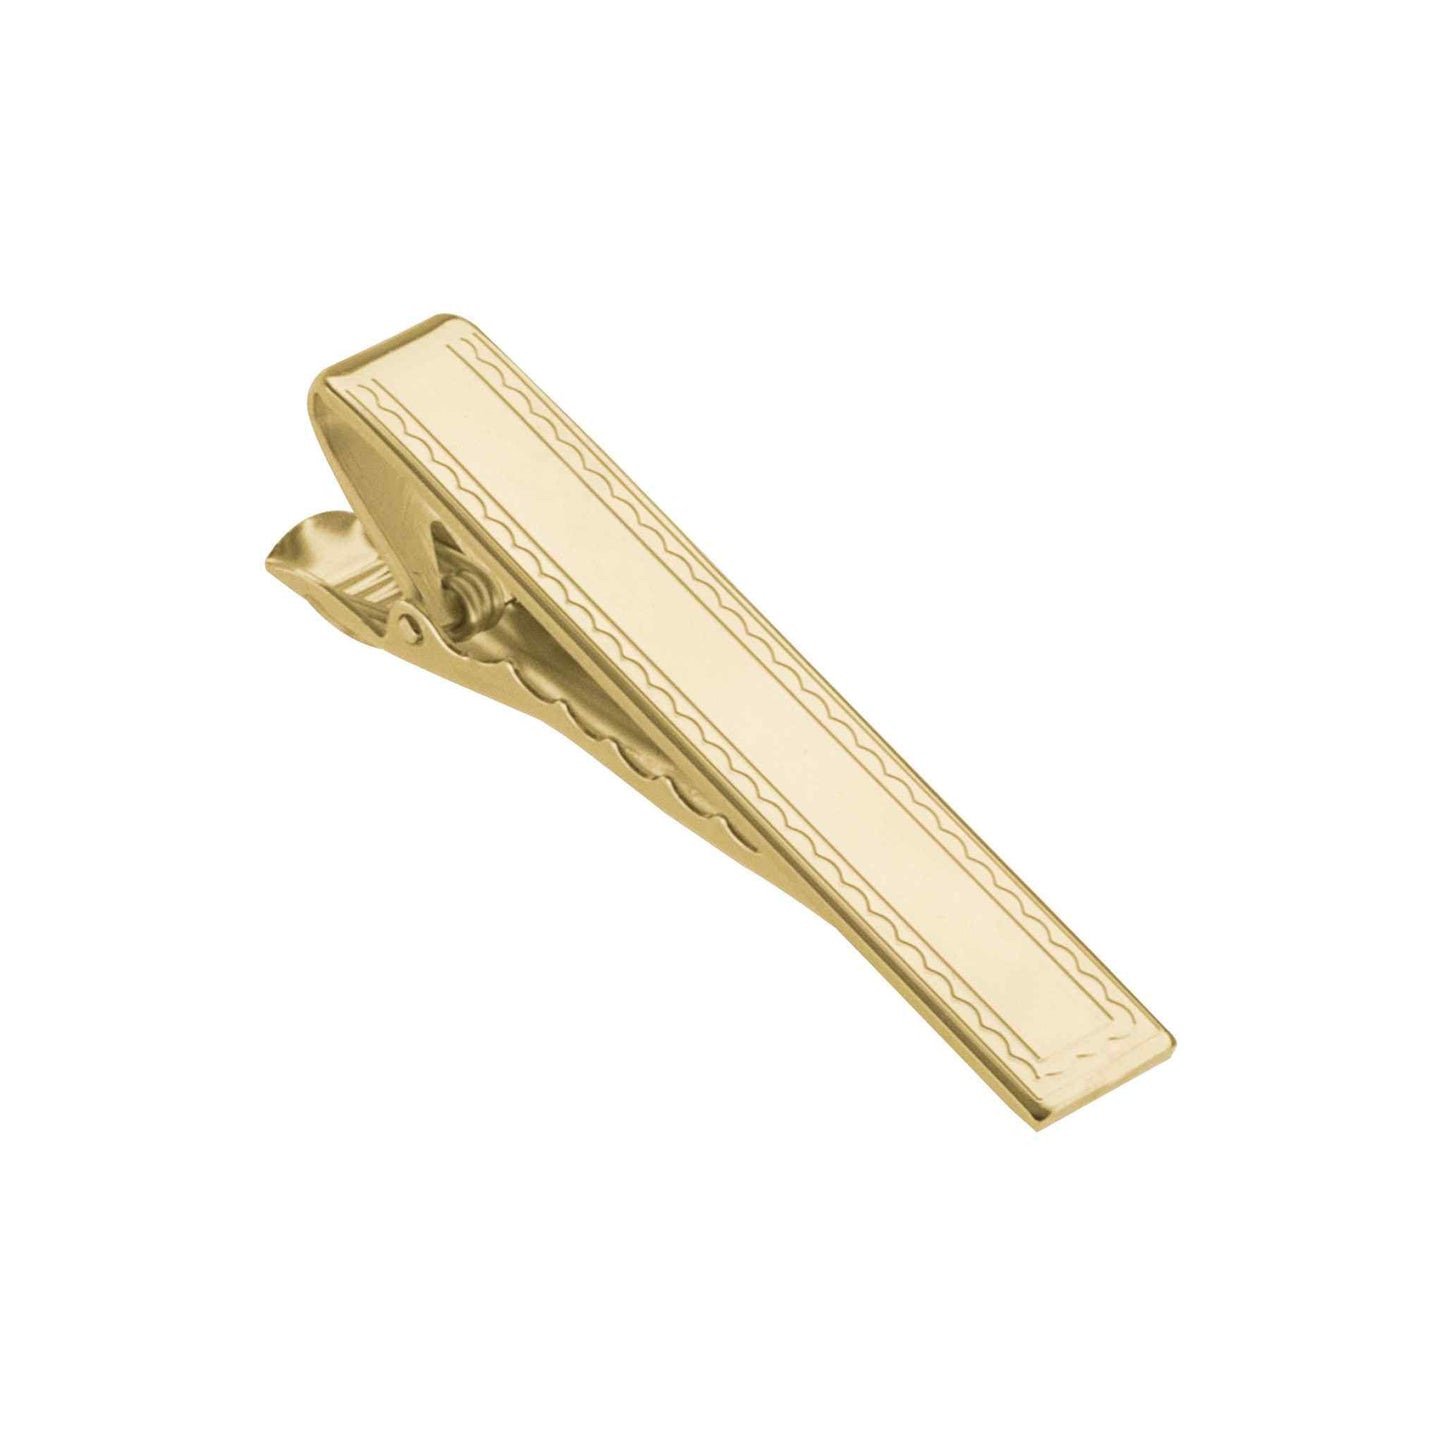 A tie bar with rope border displayed on a neutral white background.